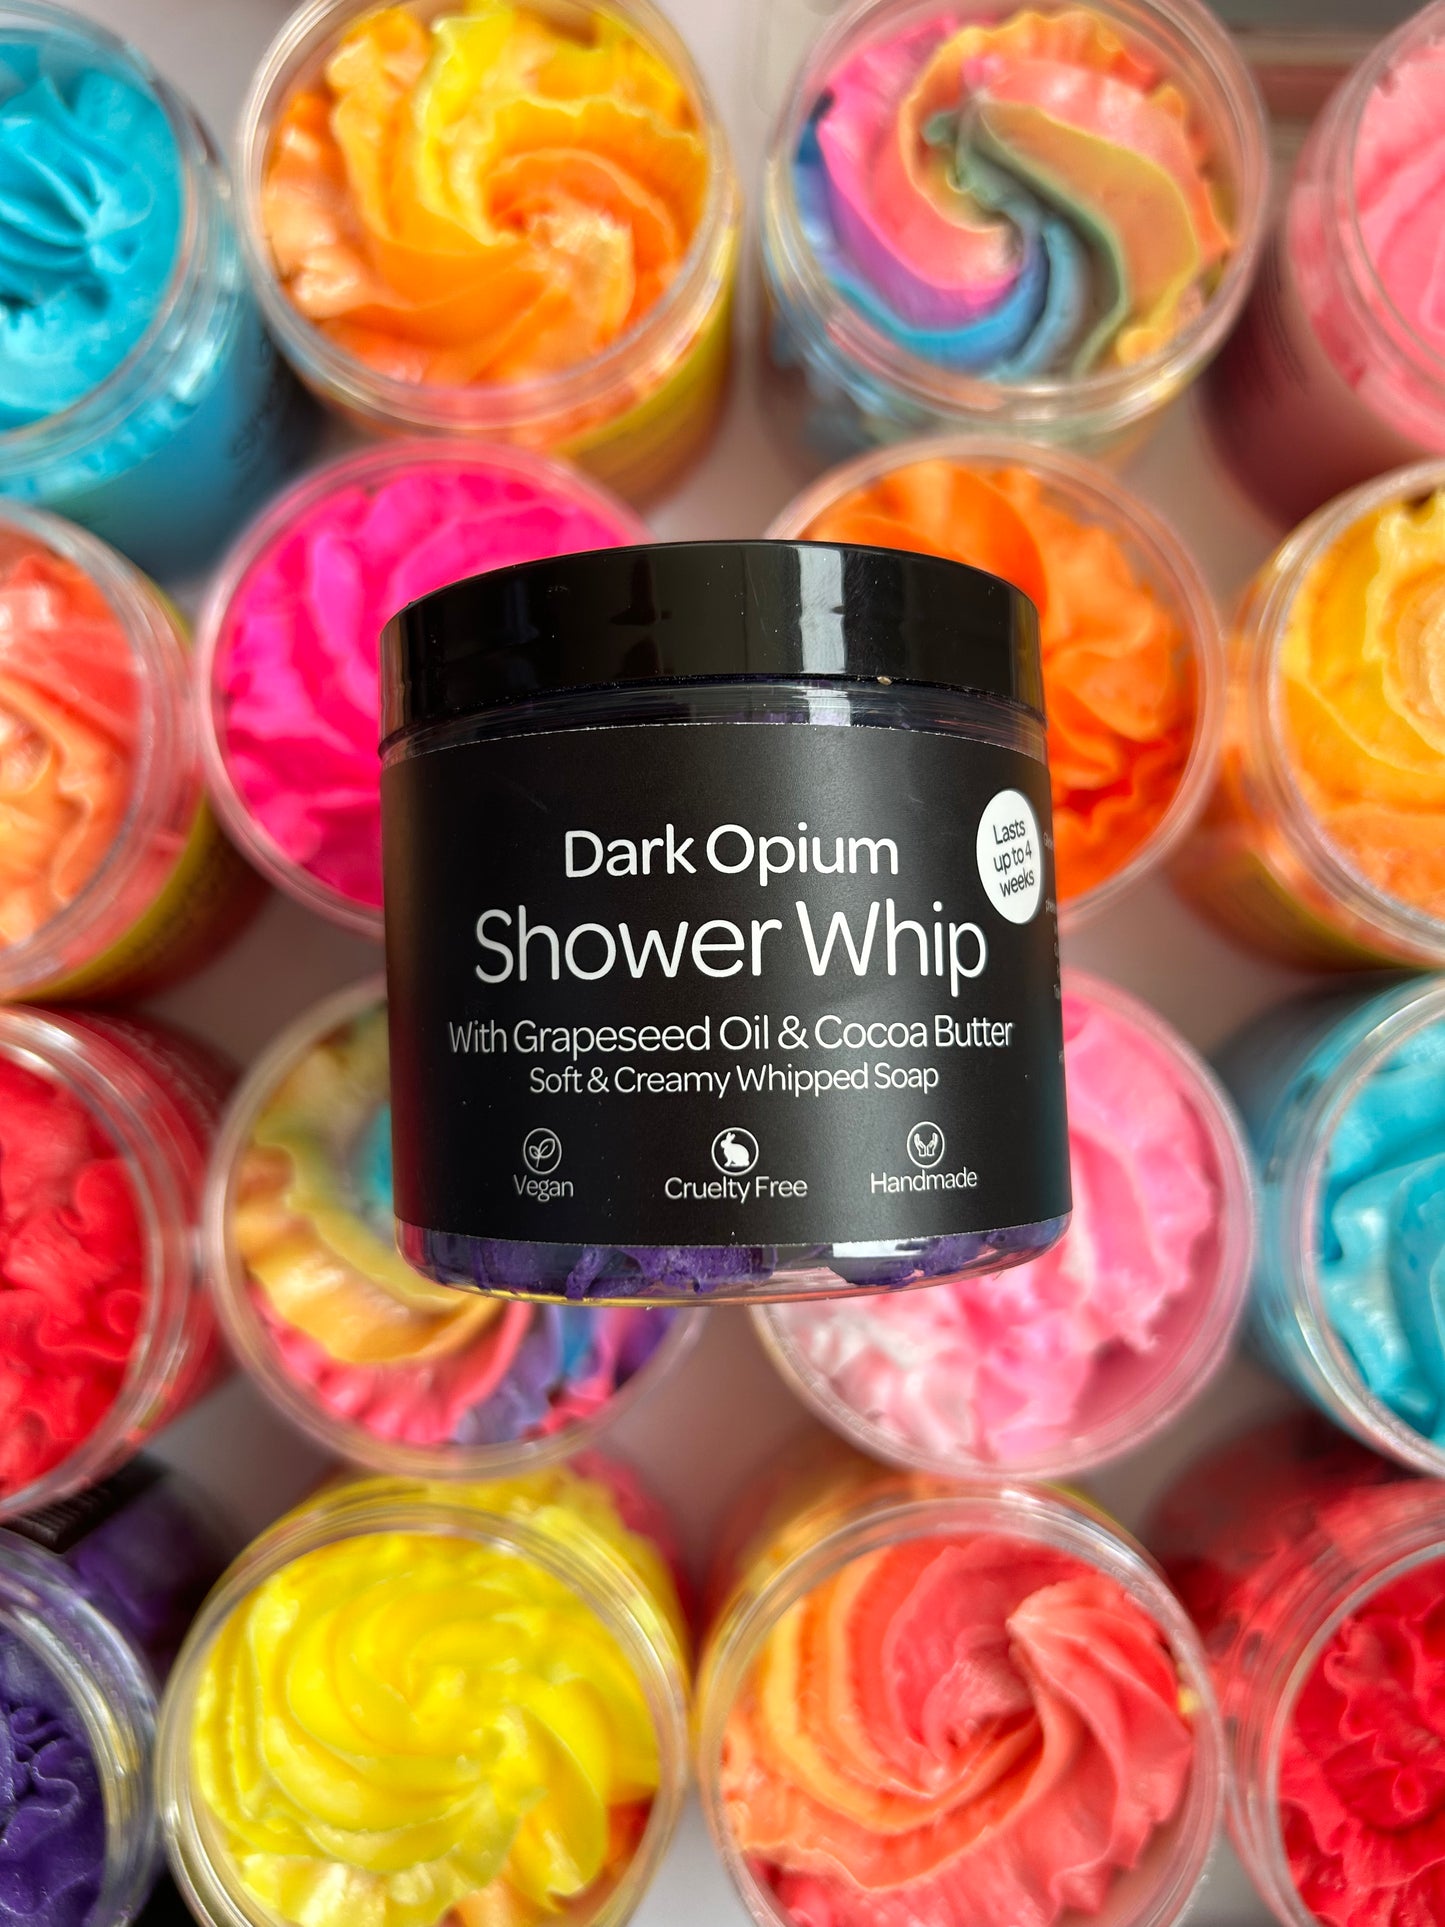 Whipped soaps